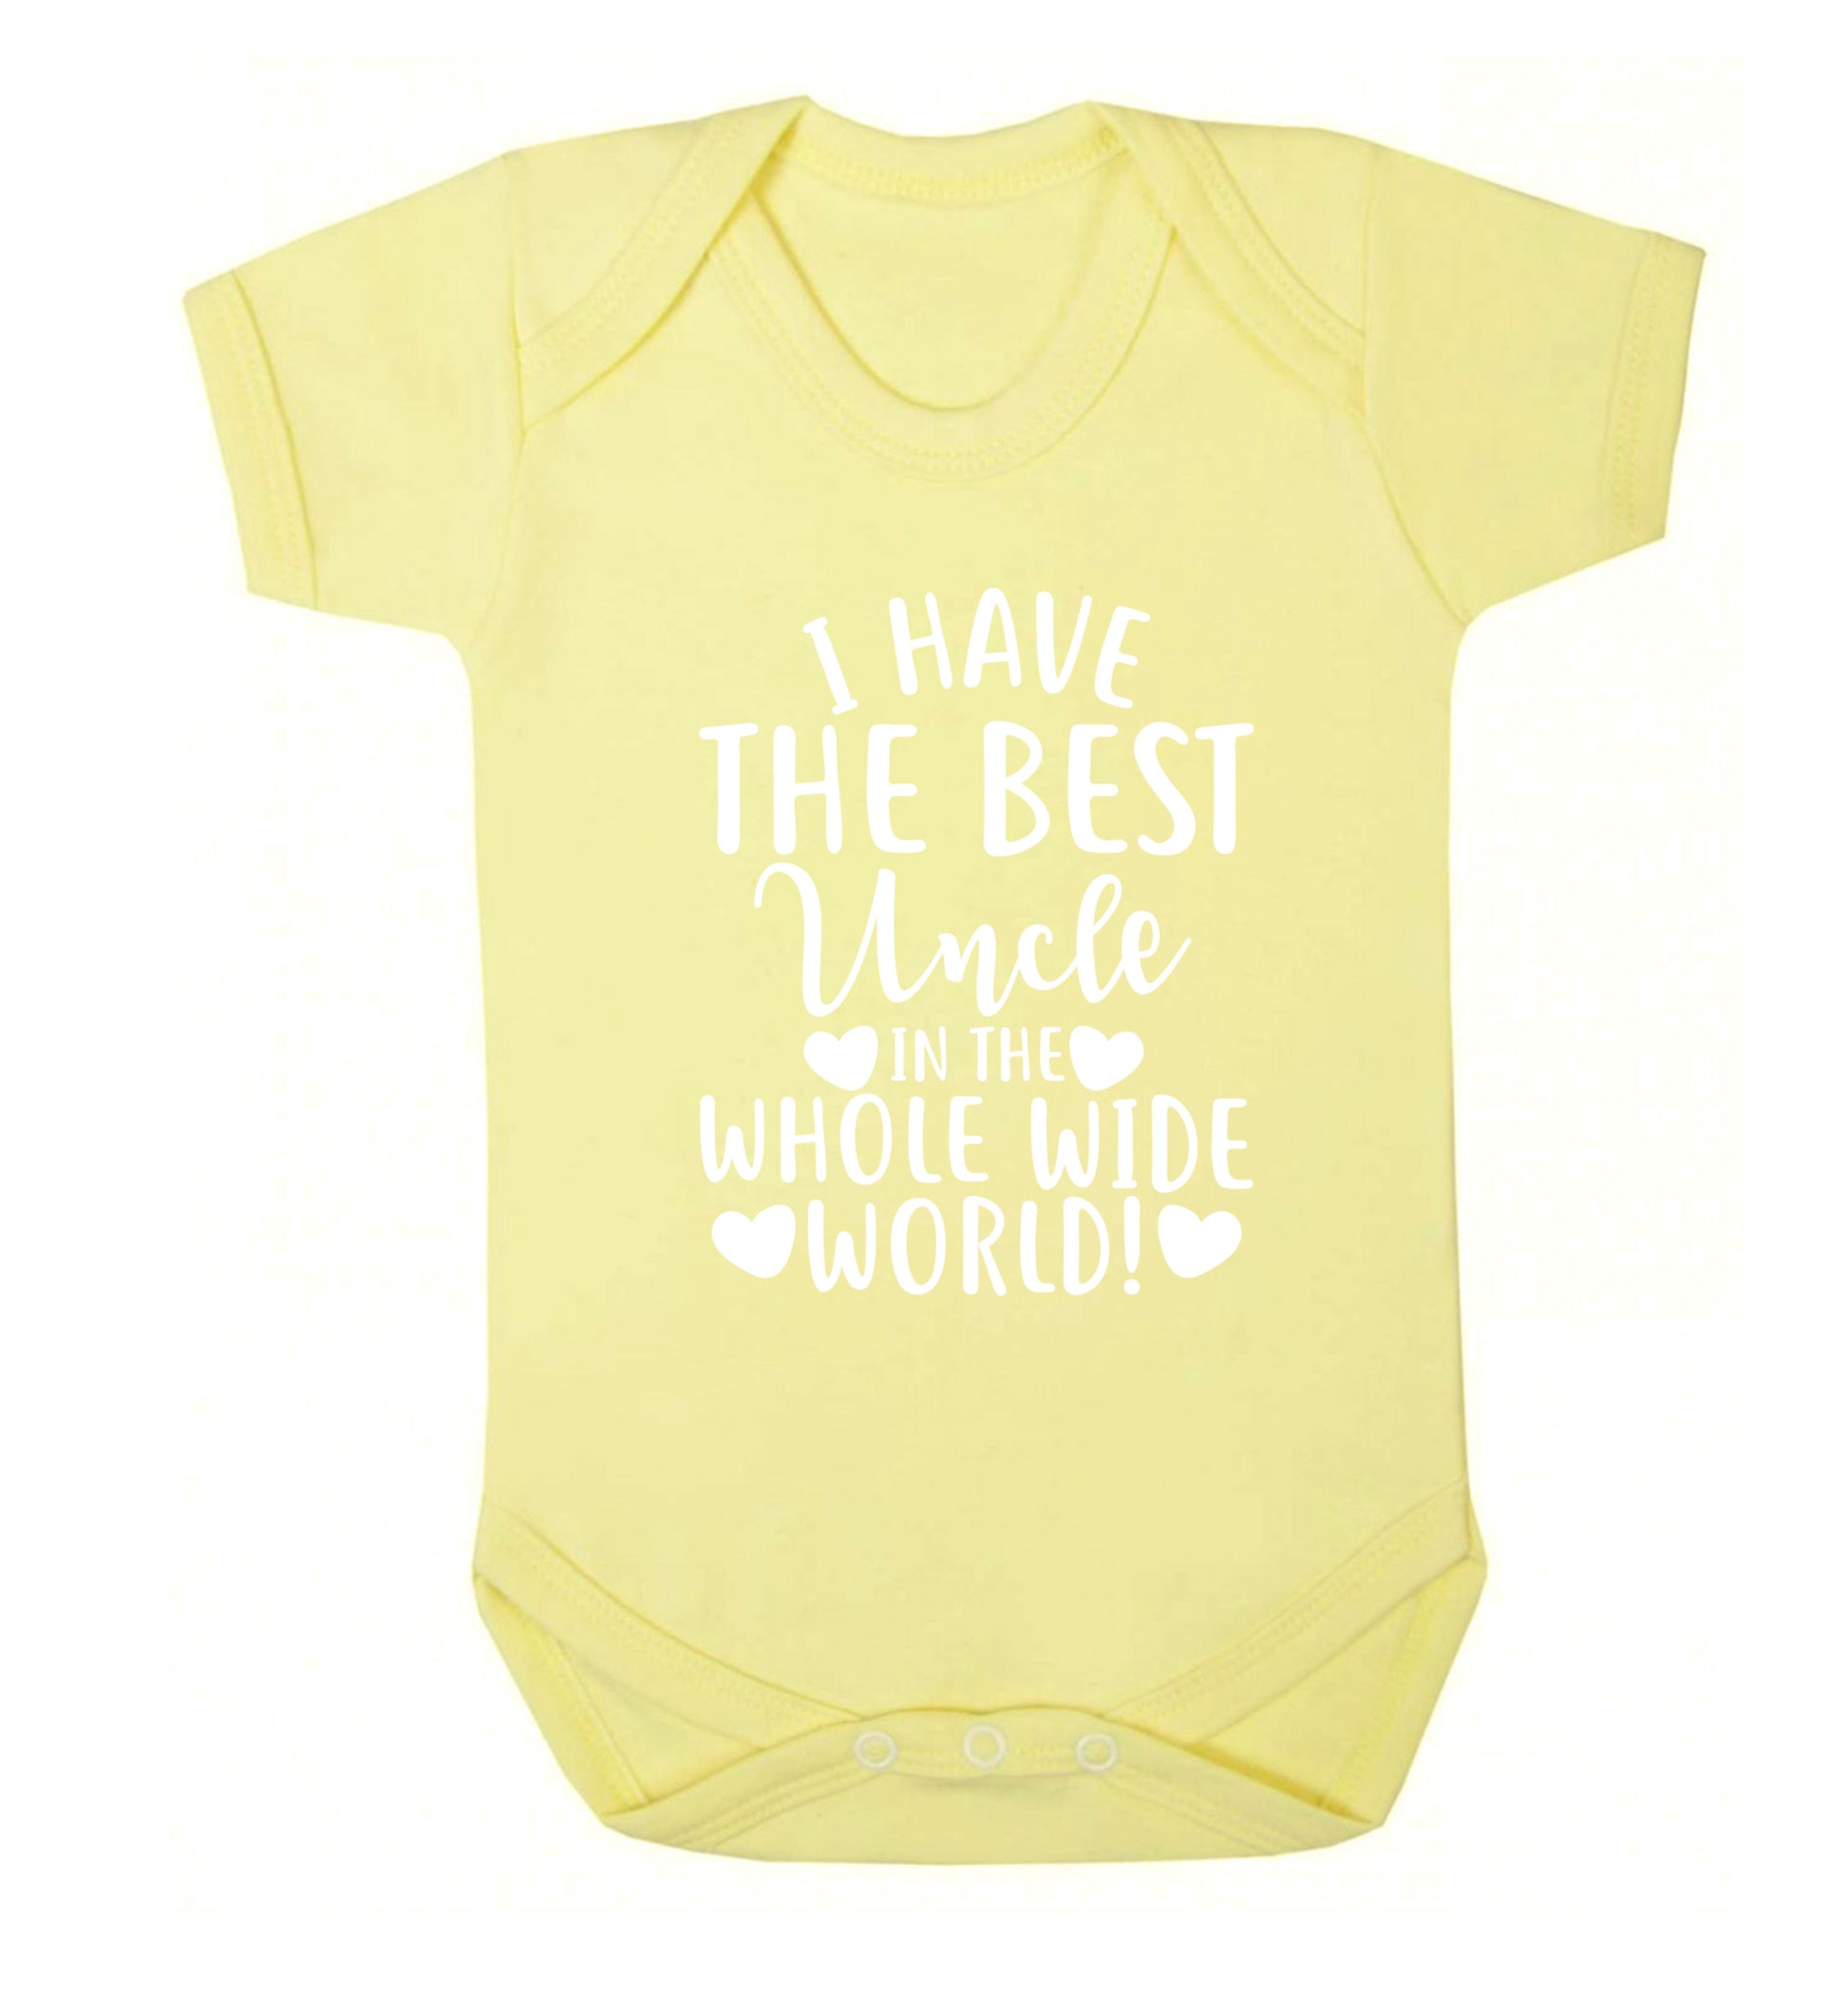 I have the best uncle in the whole wide world! Baby Vest pale yellow 18-24 months